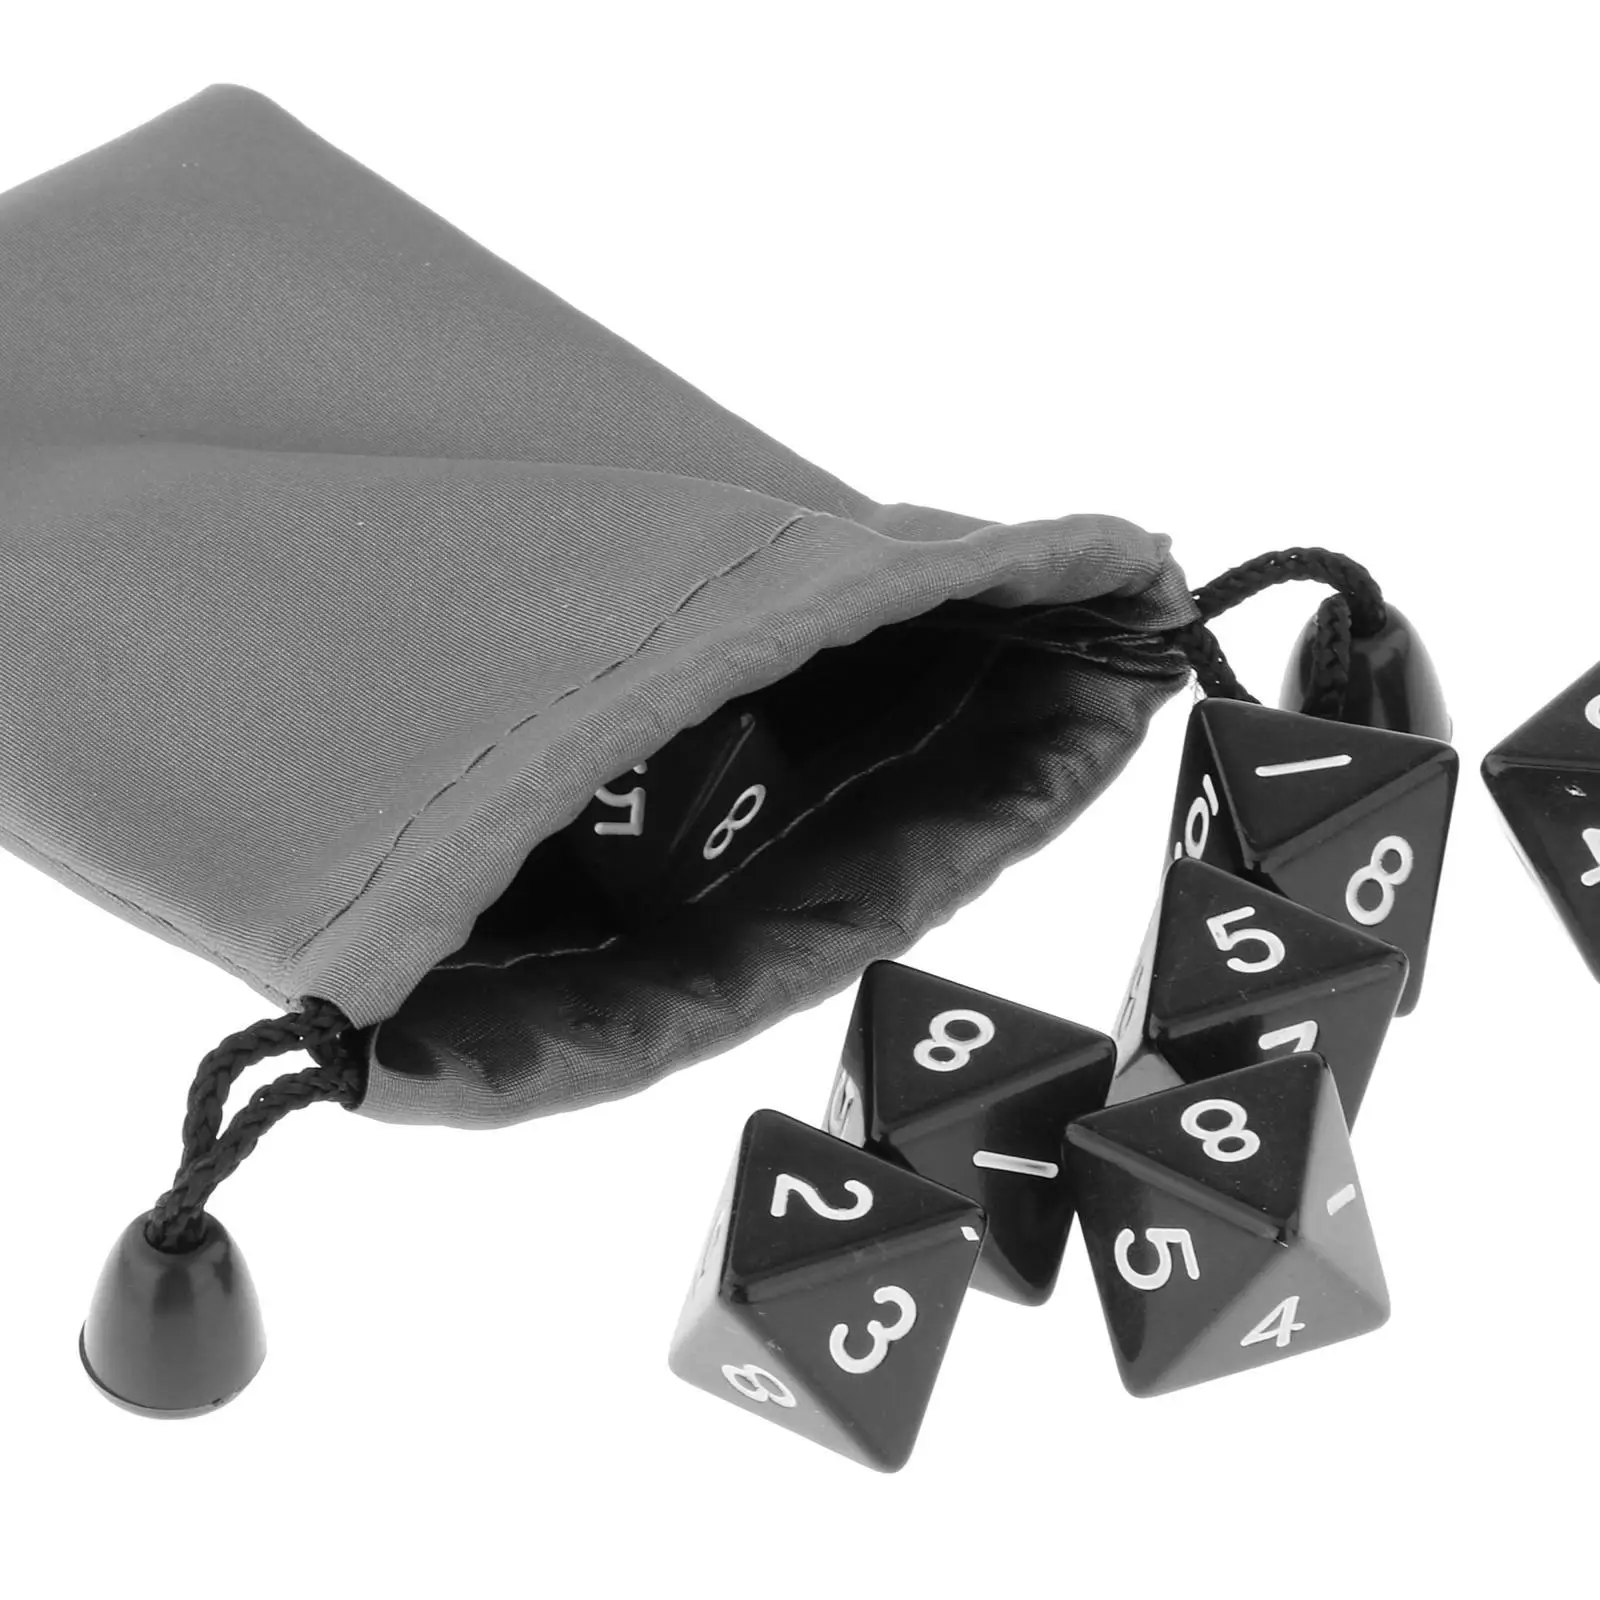 8x Digital Dice Role Playing Dice Set with White Numbers for Kids Teens